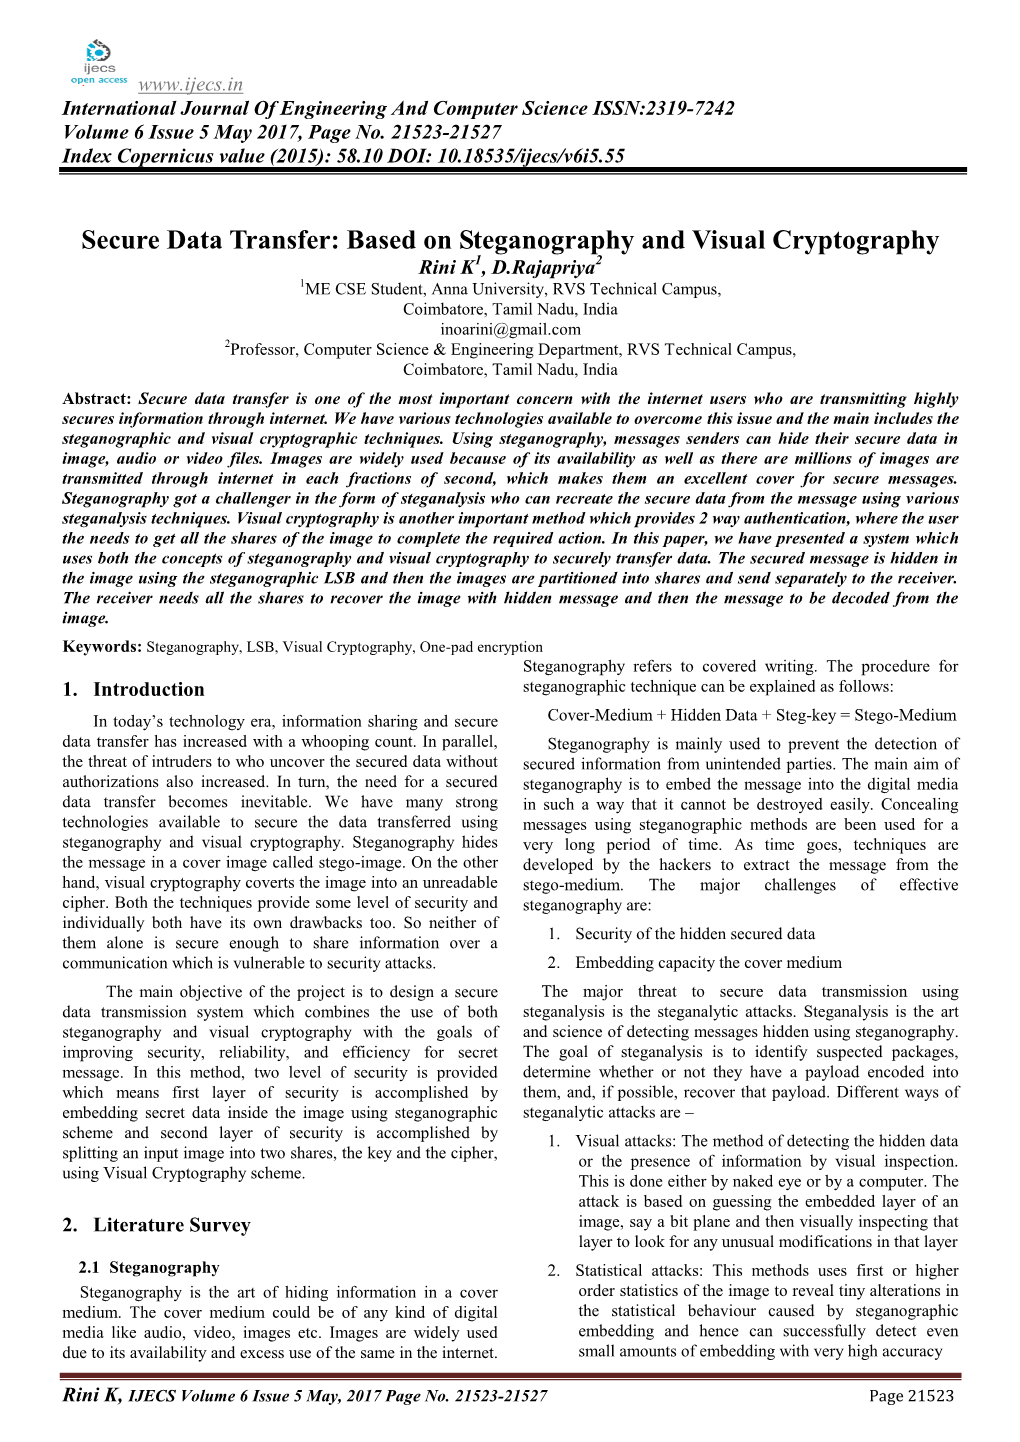 Based on Steganography and Visual Cryptography